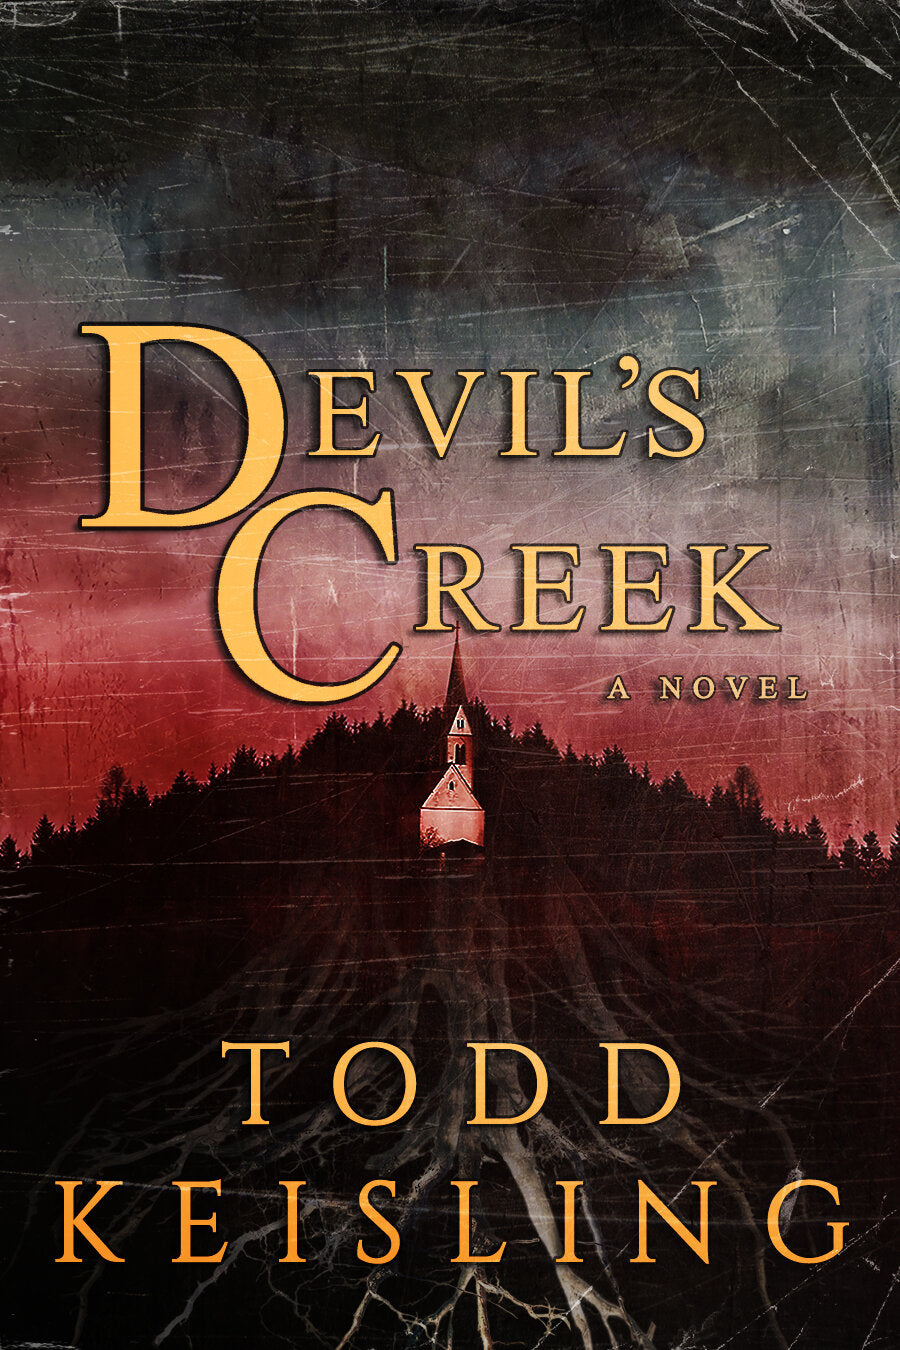 Happy Book Birthday to DEVIL'S CREEK by Todd Keisling